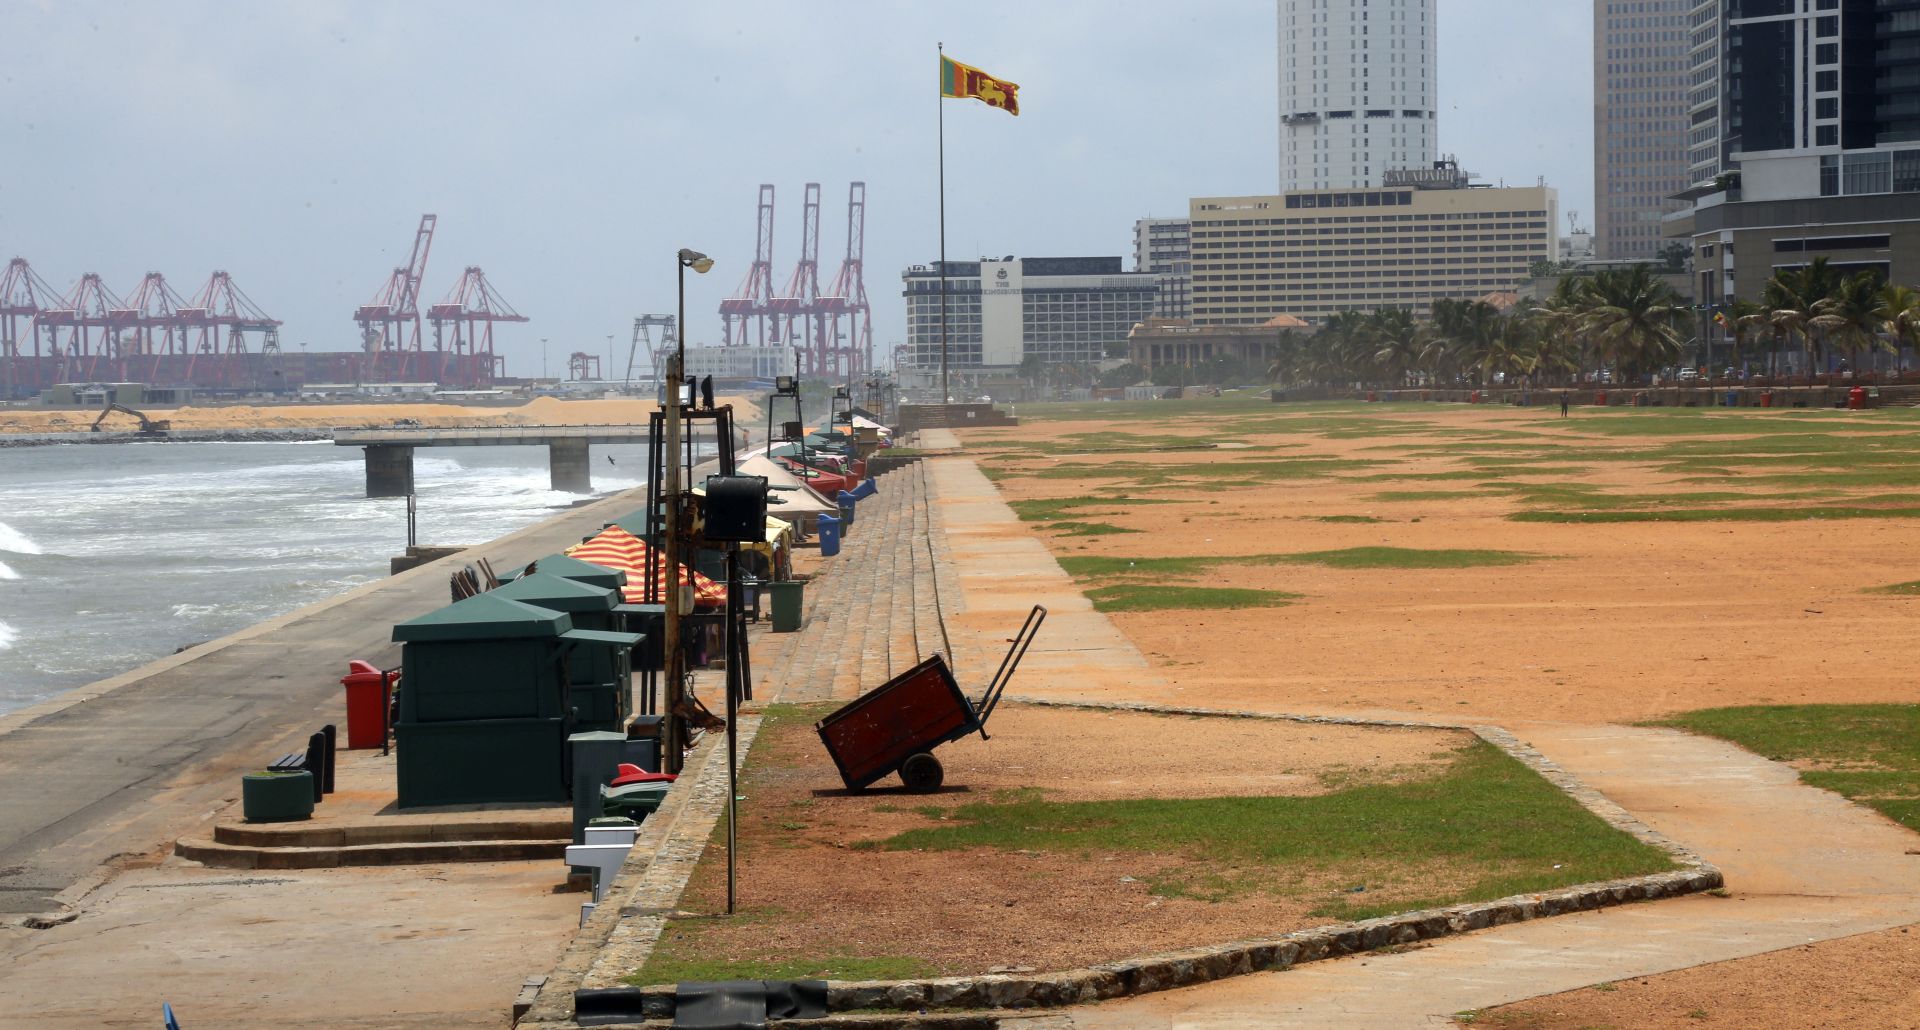 epa07526909 A view on empty Galle Face ocean-side or beach in Colombo, Sri Lanka, 25 April 2019. According to the news reports, most public places have no people around as security agencies continue to find suspected bomb detonators after at least 320 people were killed in a coordinated series of blasts during the Easter Sunday service at churches and hotels in Sri Lanka on 21 April 2019.  EPA/M.A. PUSHPA KUMARA